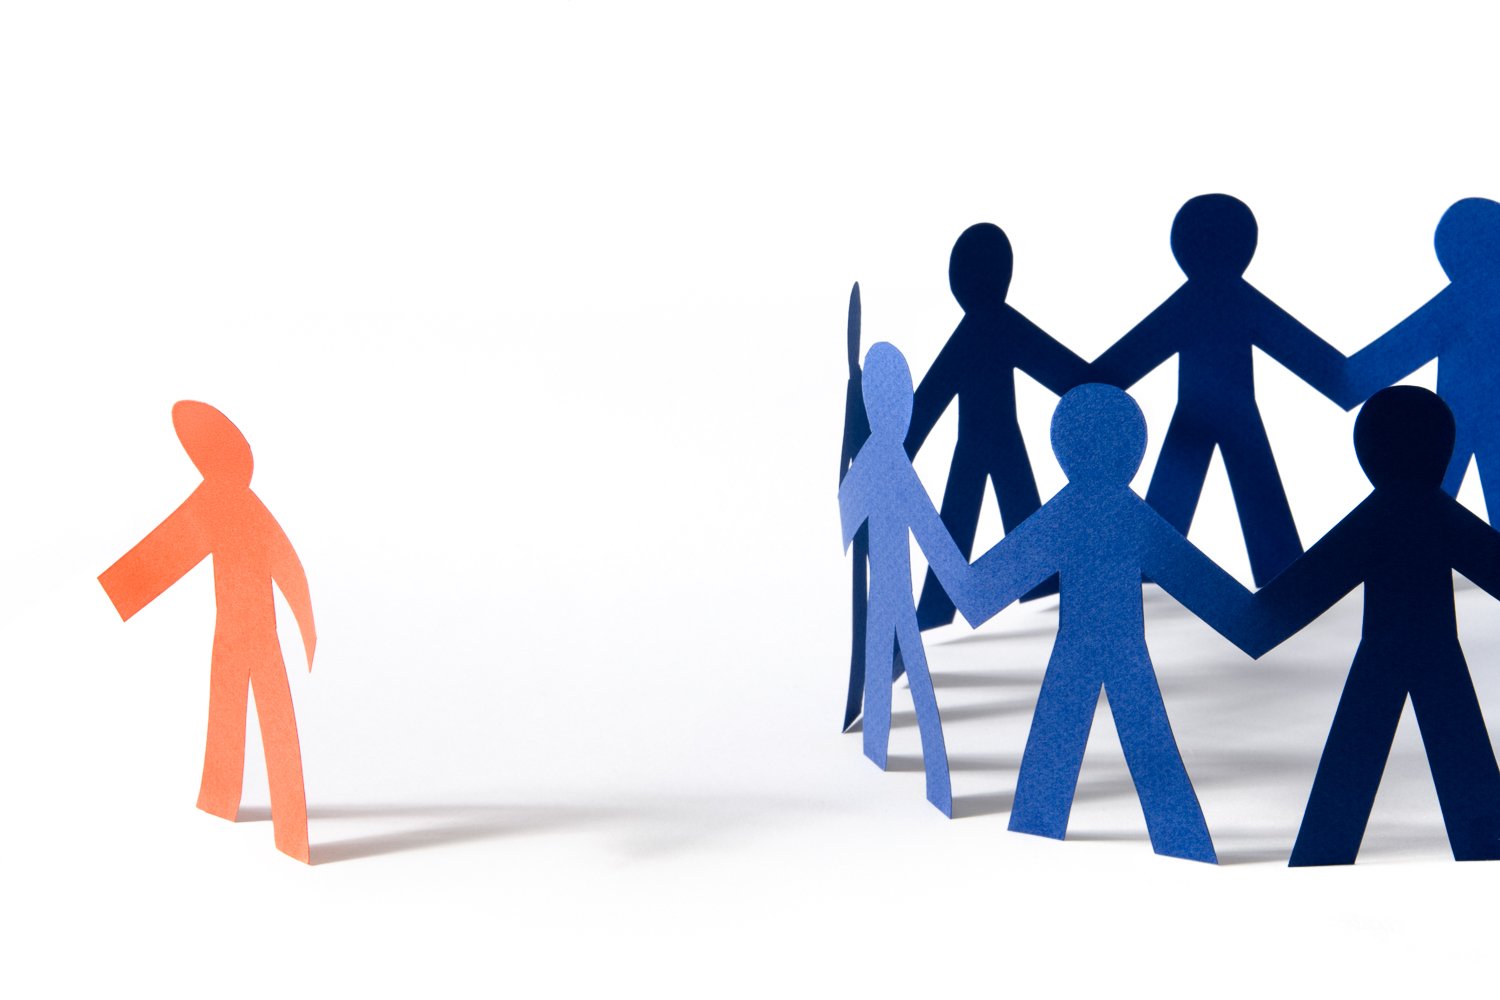 Illustration of cutout people in a circle with one standing to the side to illustrate feeling lonely